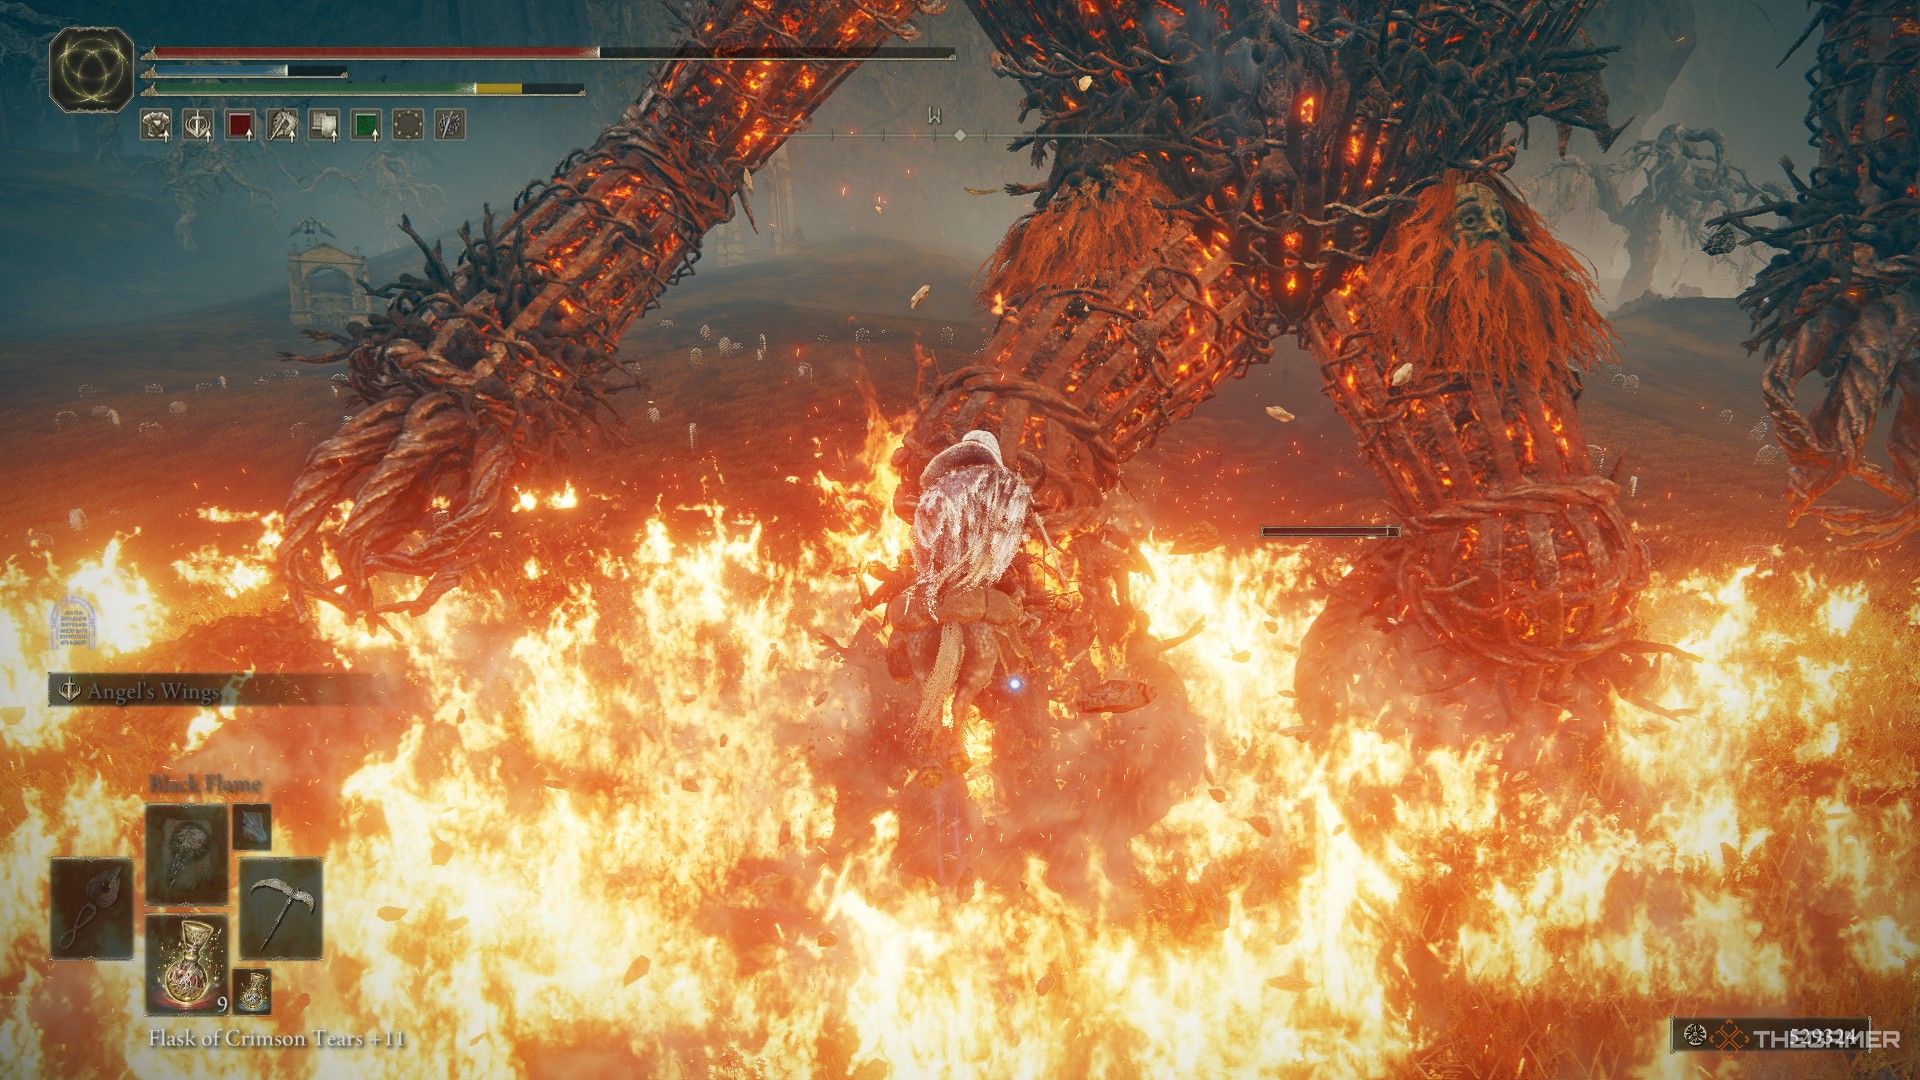 Player jumps over the flames of the Furnace Golem while on Torrent during battle in Elden Ring: Shadow of the Erdtree.